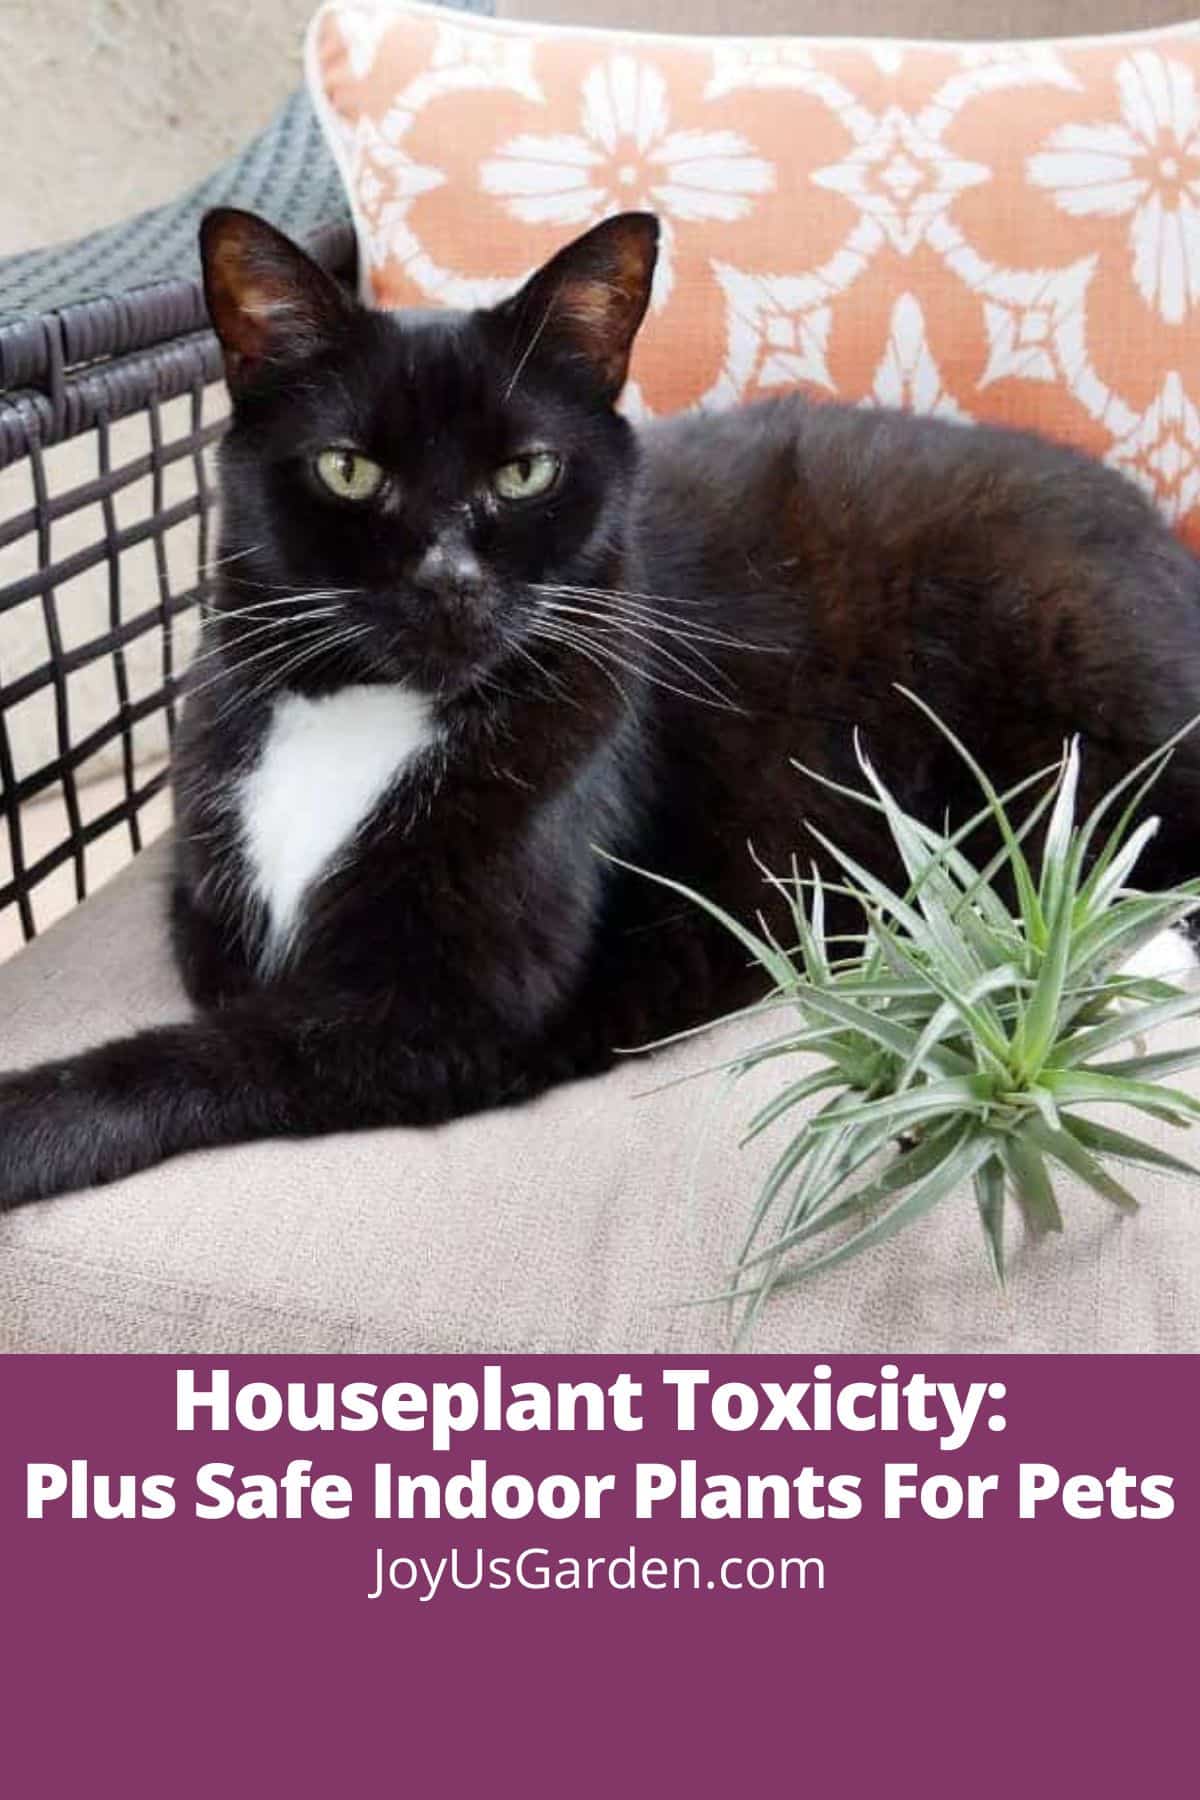 A black & white tuxedo cat on outdoor chair laying next to air plant text reads Houseplant Toxicity: Plus Safe Indoor Plants For Pets joyusgarden.com.